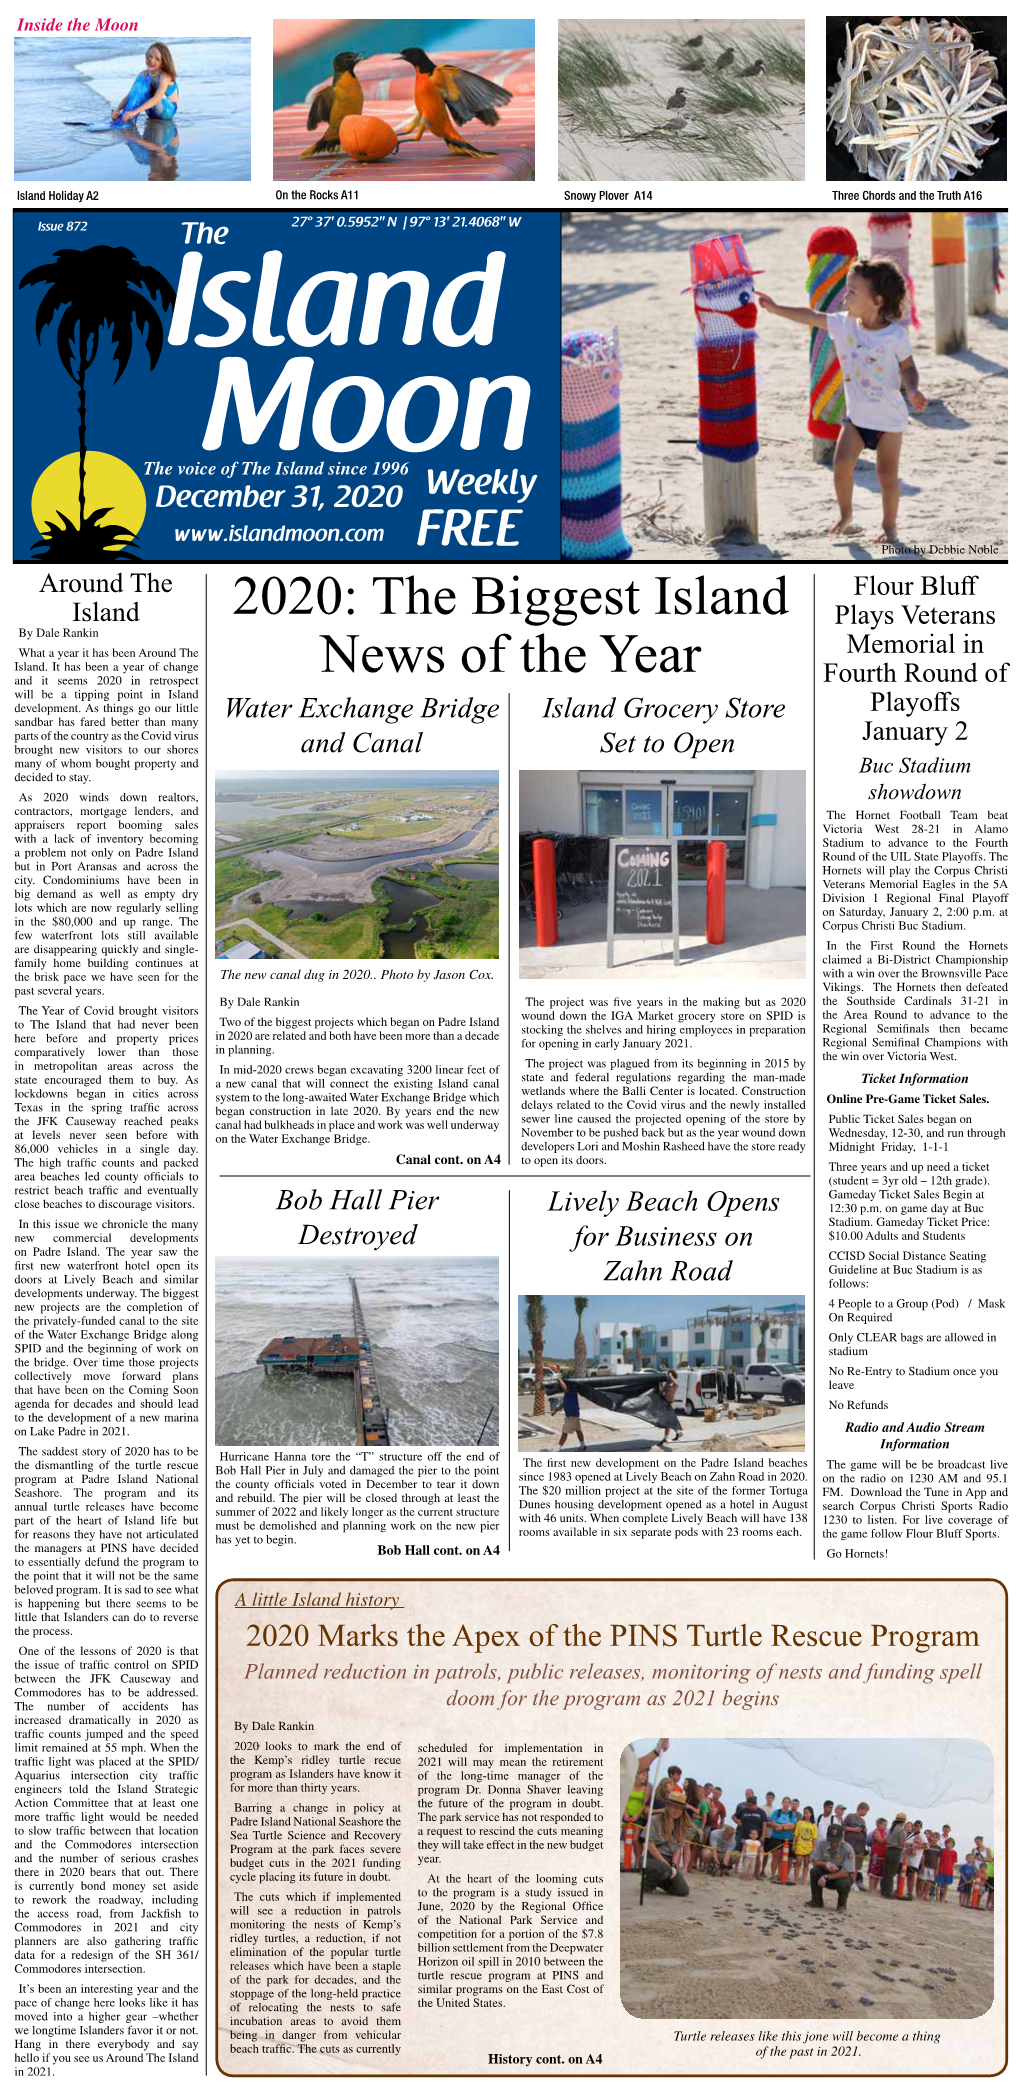 2020: the Biggest Island News of the Year